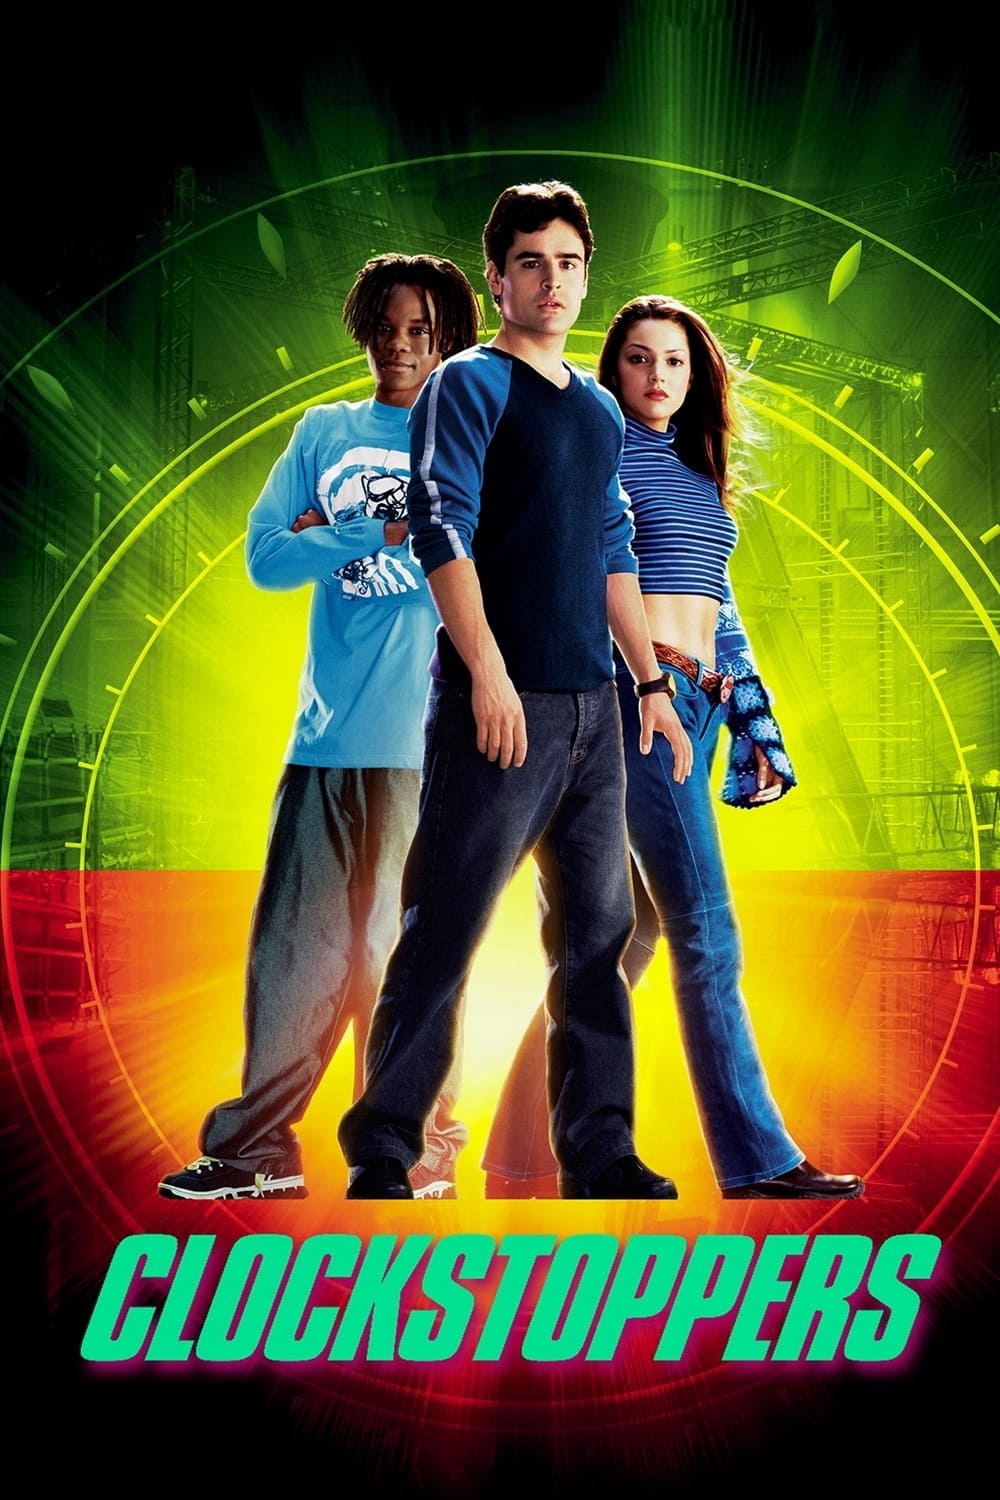 Thời Gian Dừng Lại (Clockstoppers) [2002]